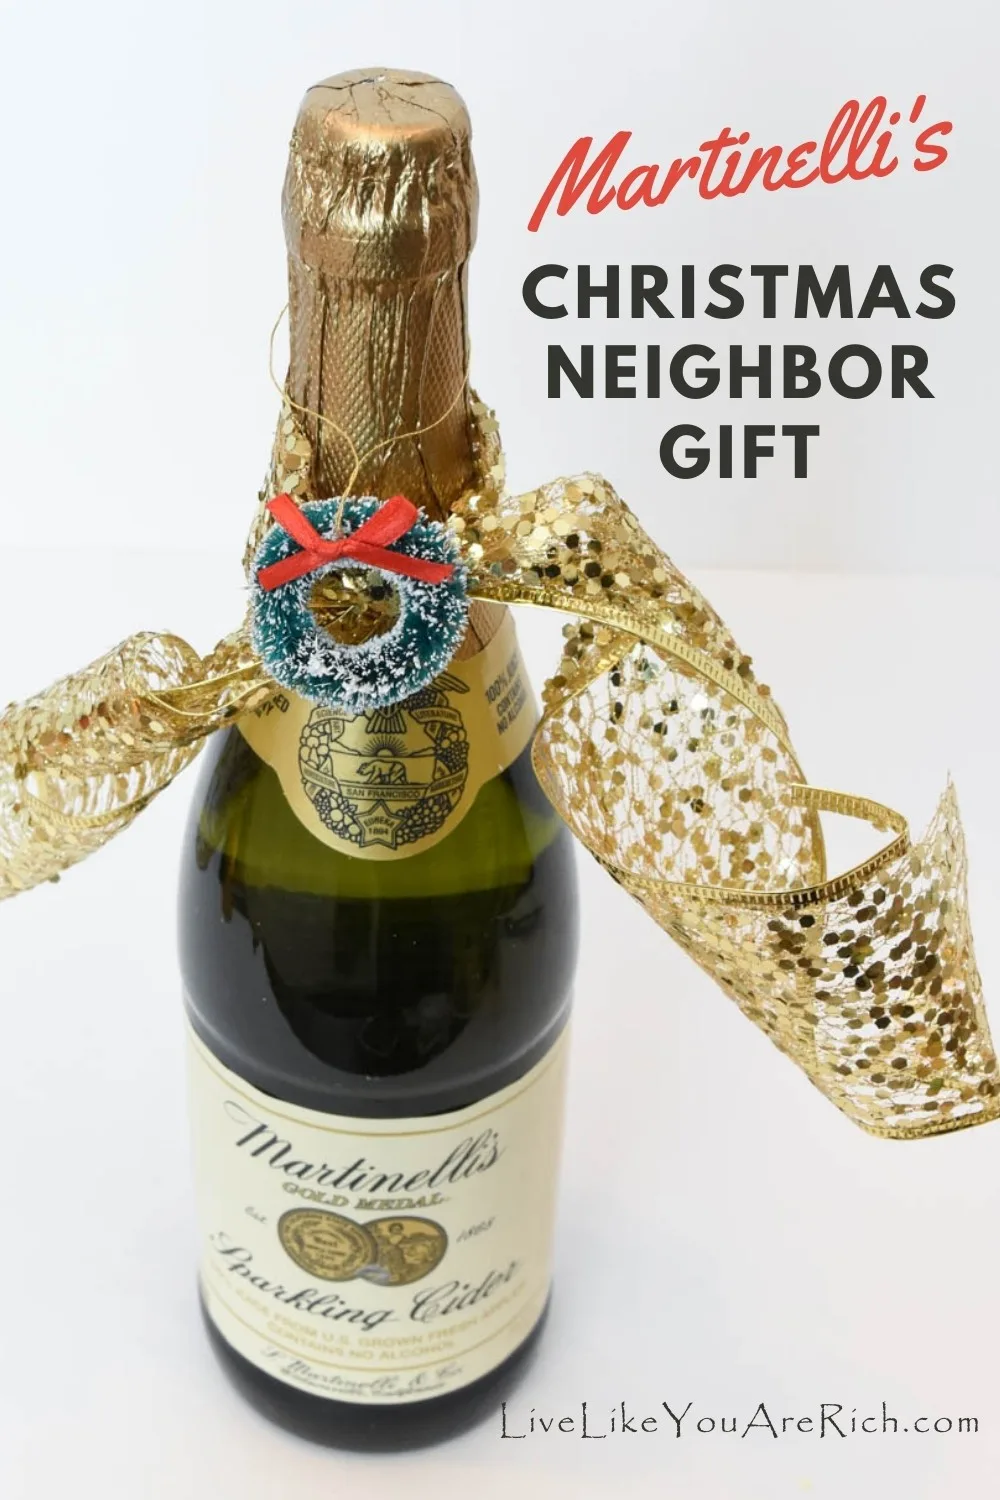 A Martinelli’s Christmas neighbor gift is a great way to share the holiday season with others. Giving Martinelli’s as a Neighbor Christmas Gift can be inexpensive if found on sale. It is also an overall a crowd-pleasing gift, and its quick put together as well. All great things to consider when you are deciding what to give out to your neighbors this year.